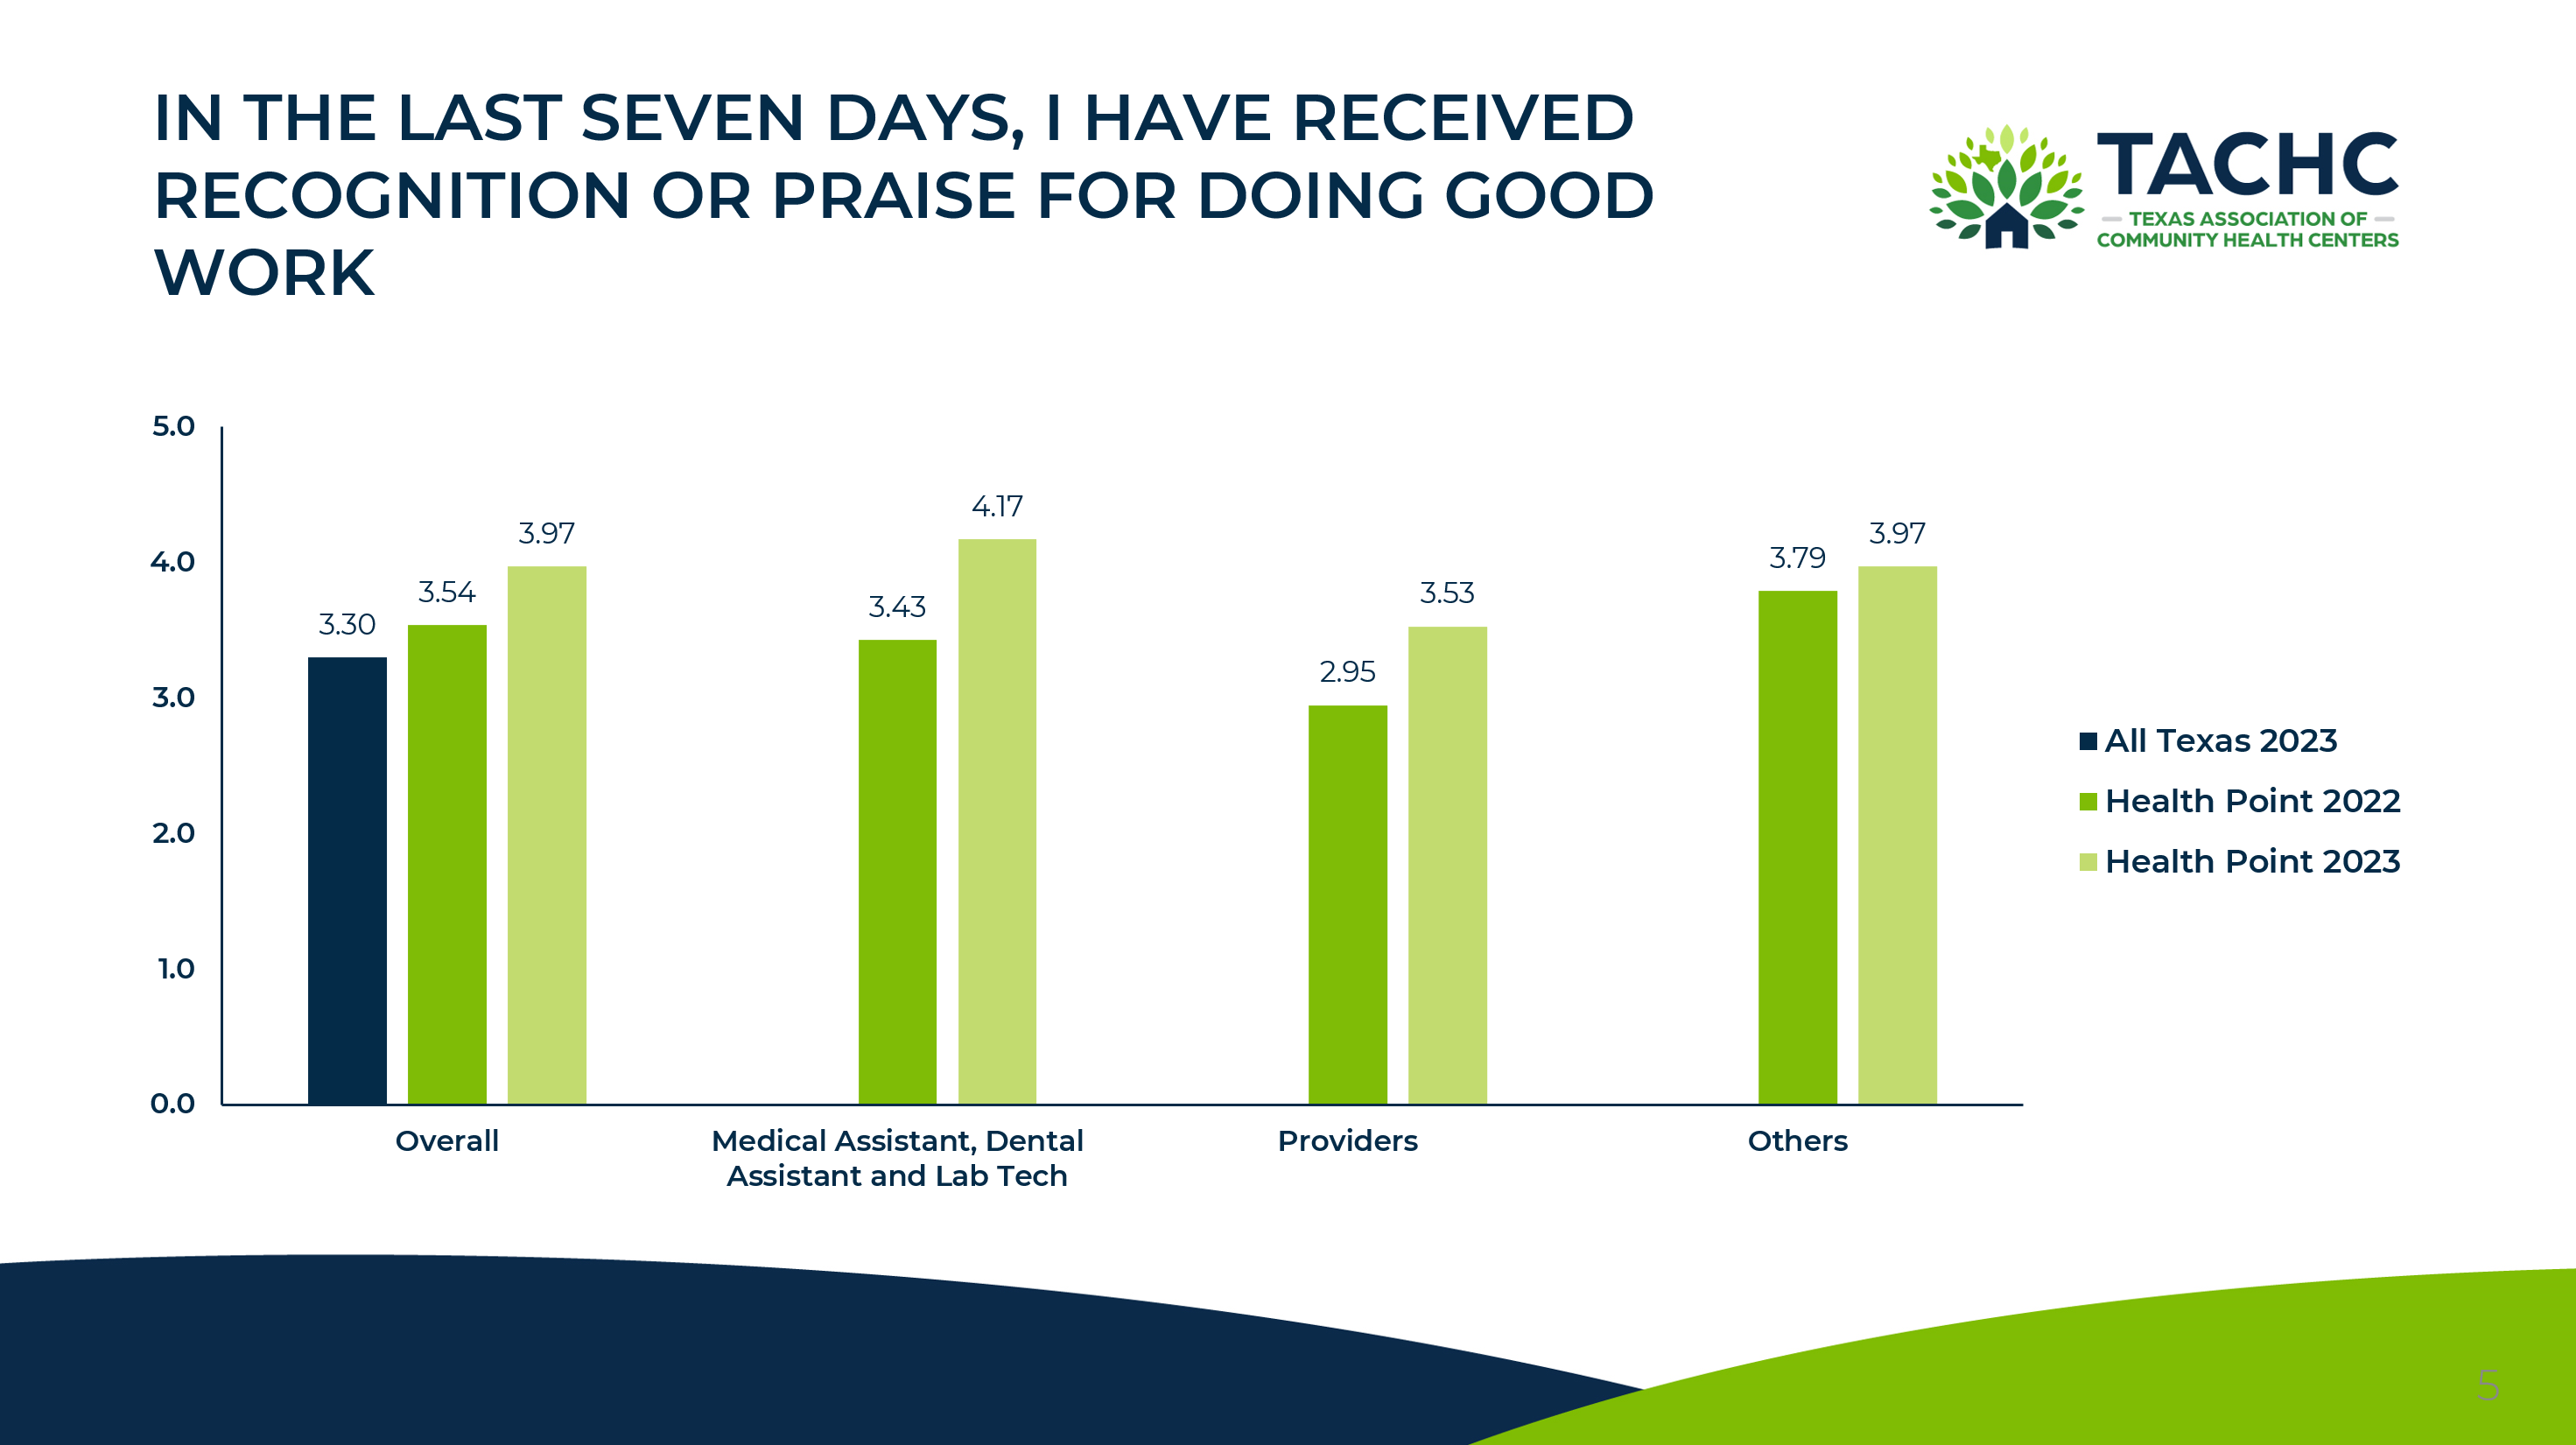 IN THE LAST SEVEN DAYS, I HAVE RECEIVED RECOGNITION OR PRAISE FOR DOING GOOD WORK